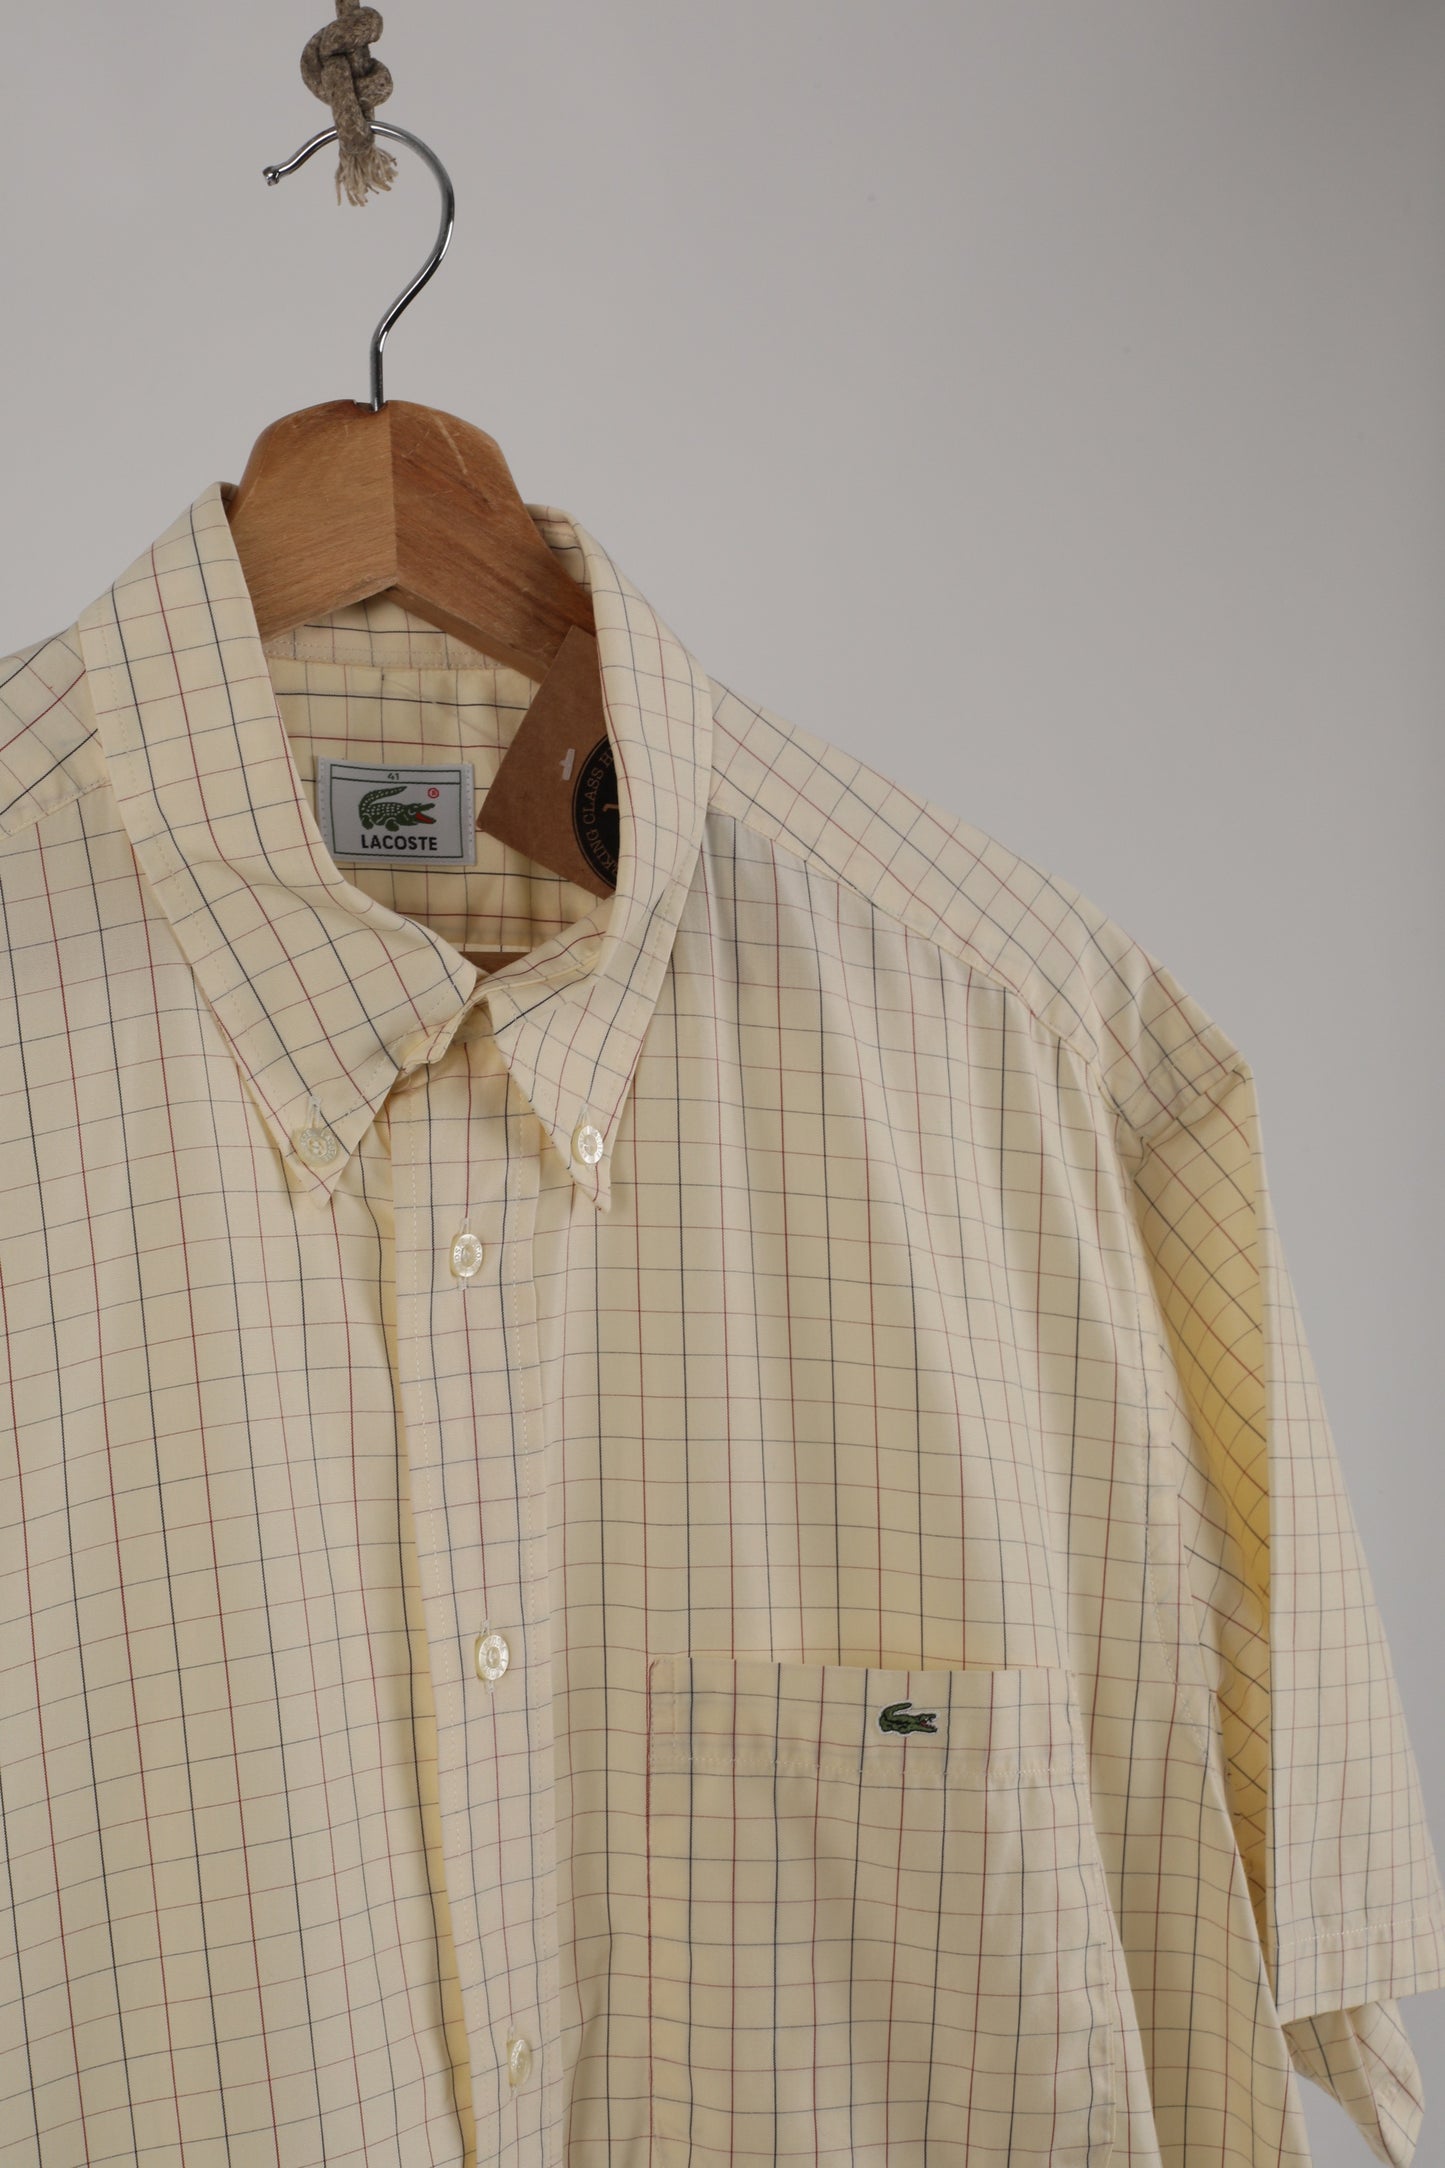 90s Lacoste short sleeve Oxford shirt (41)